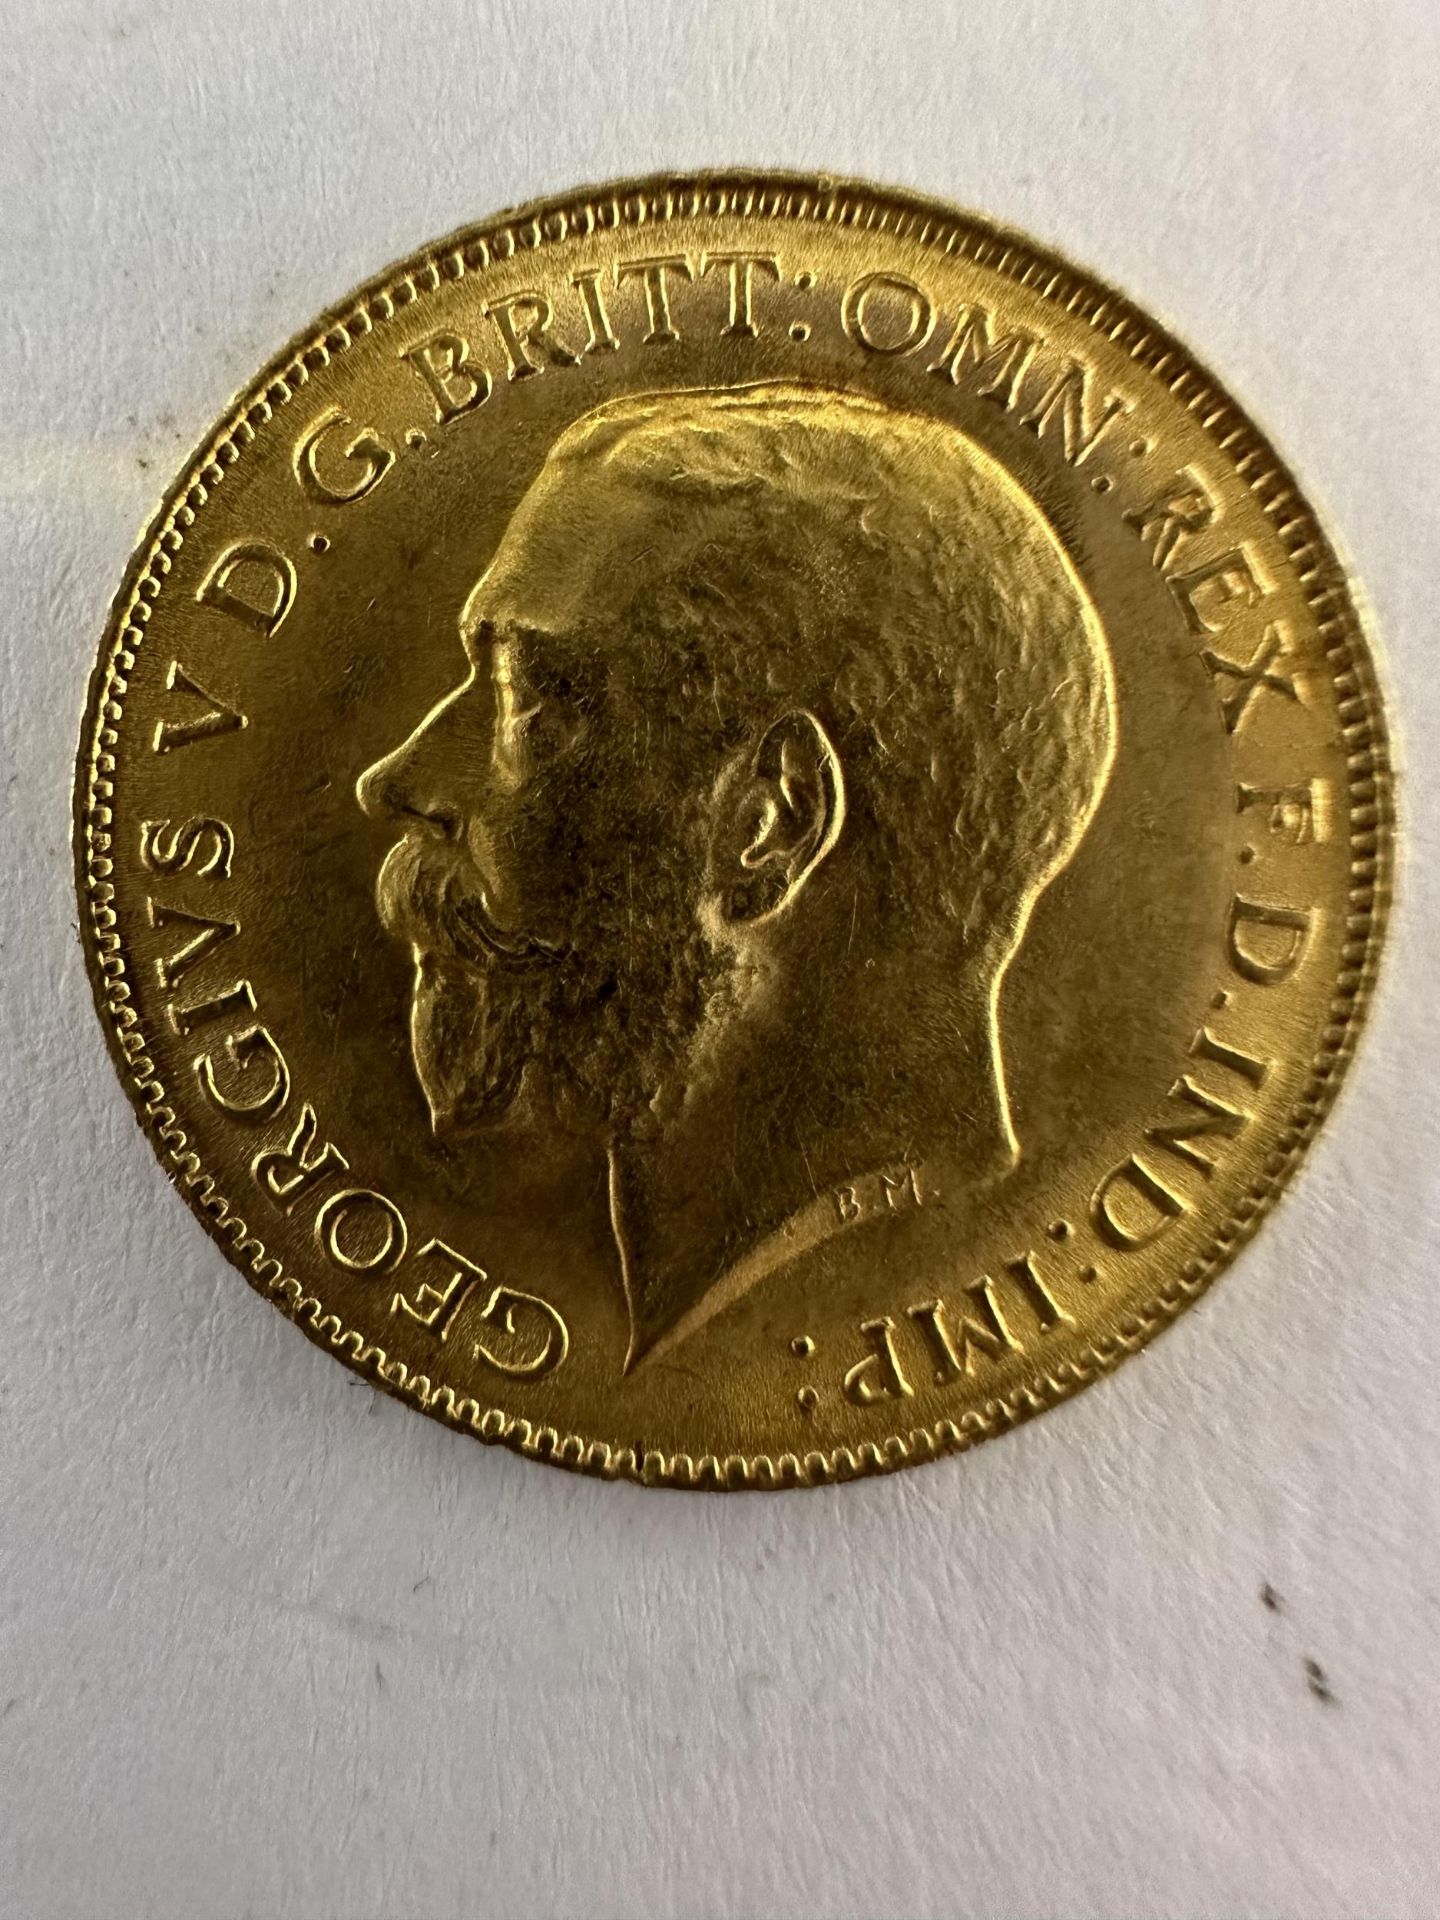 A 1915 GOLD HALF SOVEREIGN - 3.99 GRAMS - Image 2 of 2